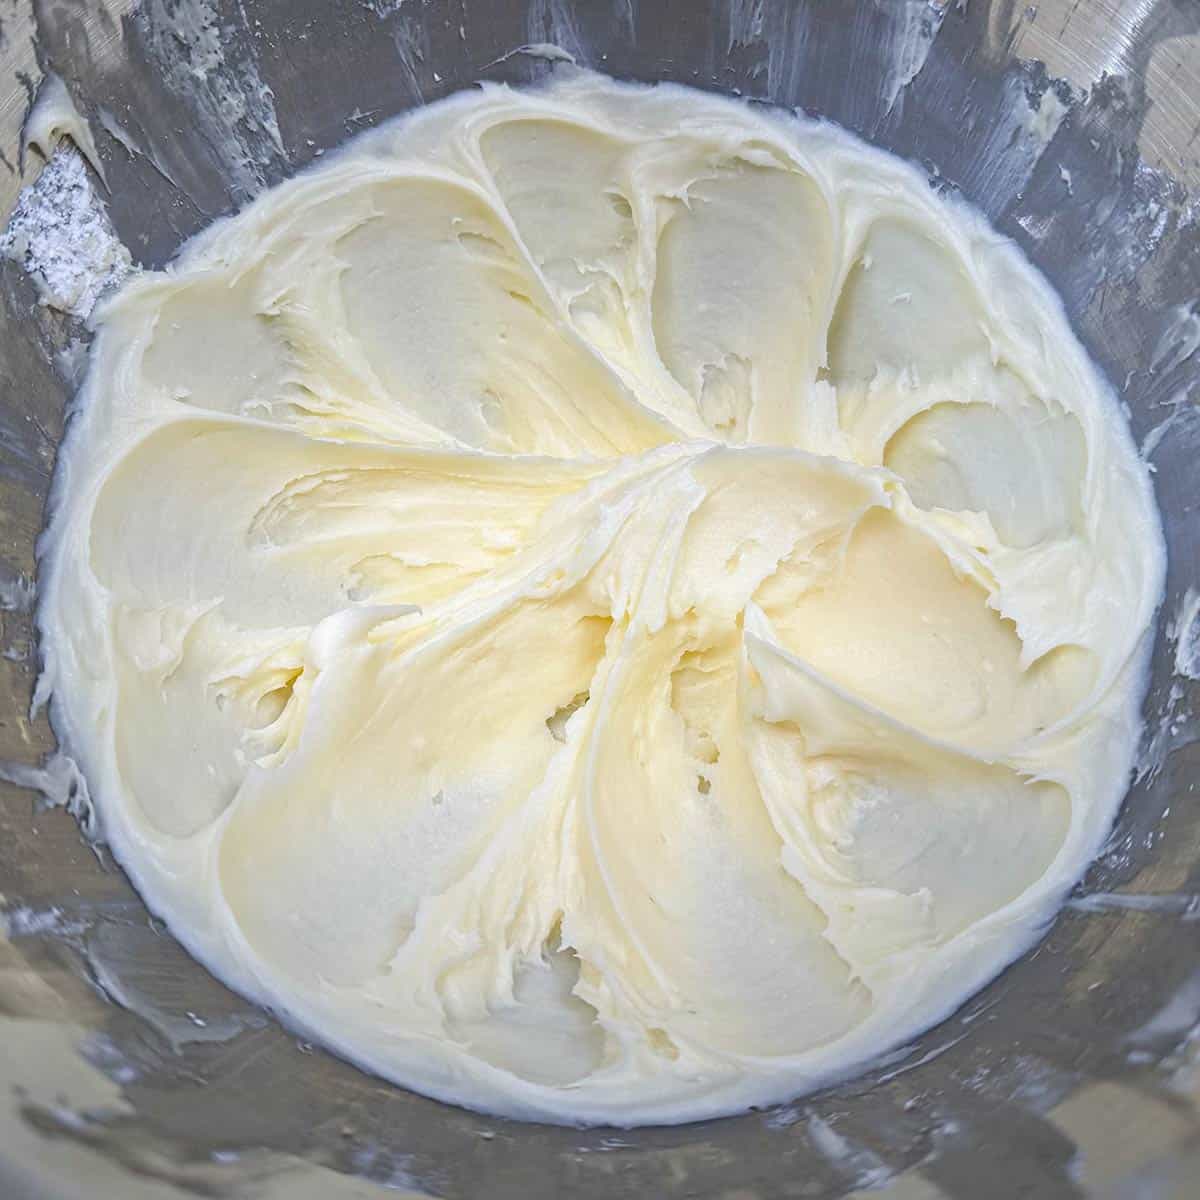 Mixing powdered sugar into the butter-cream cheese mixture. Very smooth and creamy.